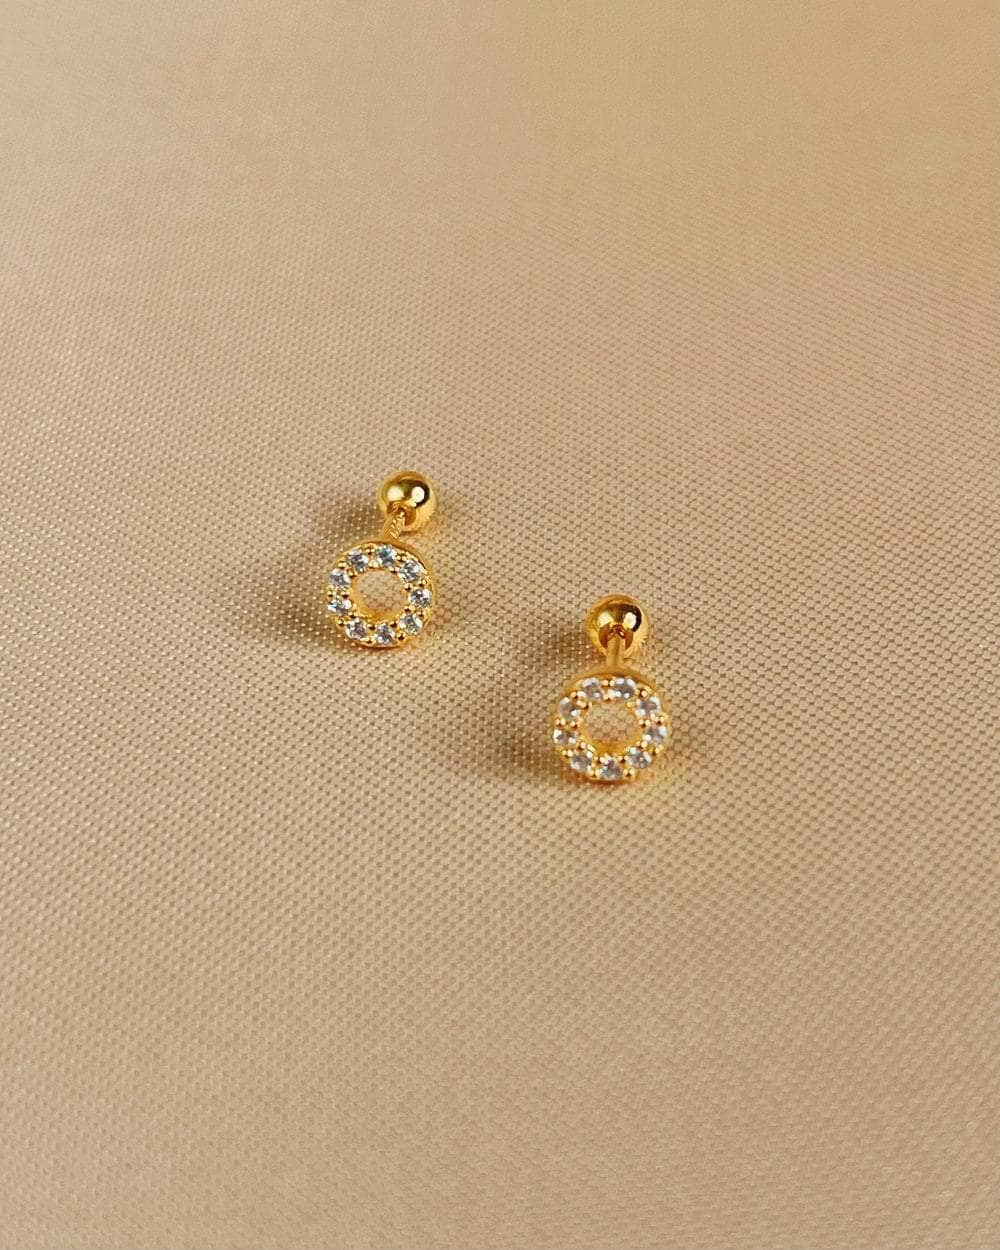 So Dainty Co. Studs Alexis Gold Studs Gold Plated 925 Sterling Silver Jewelry